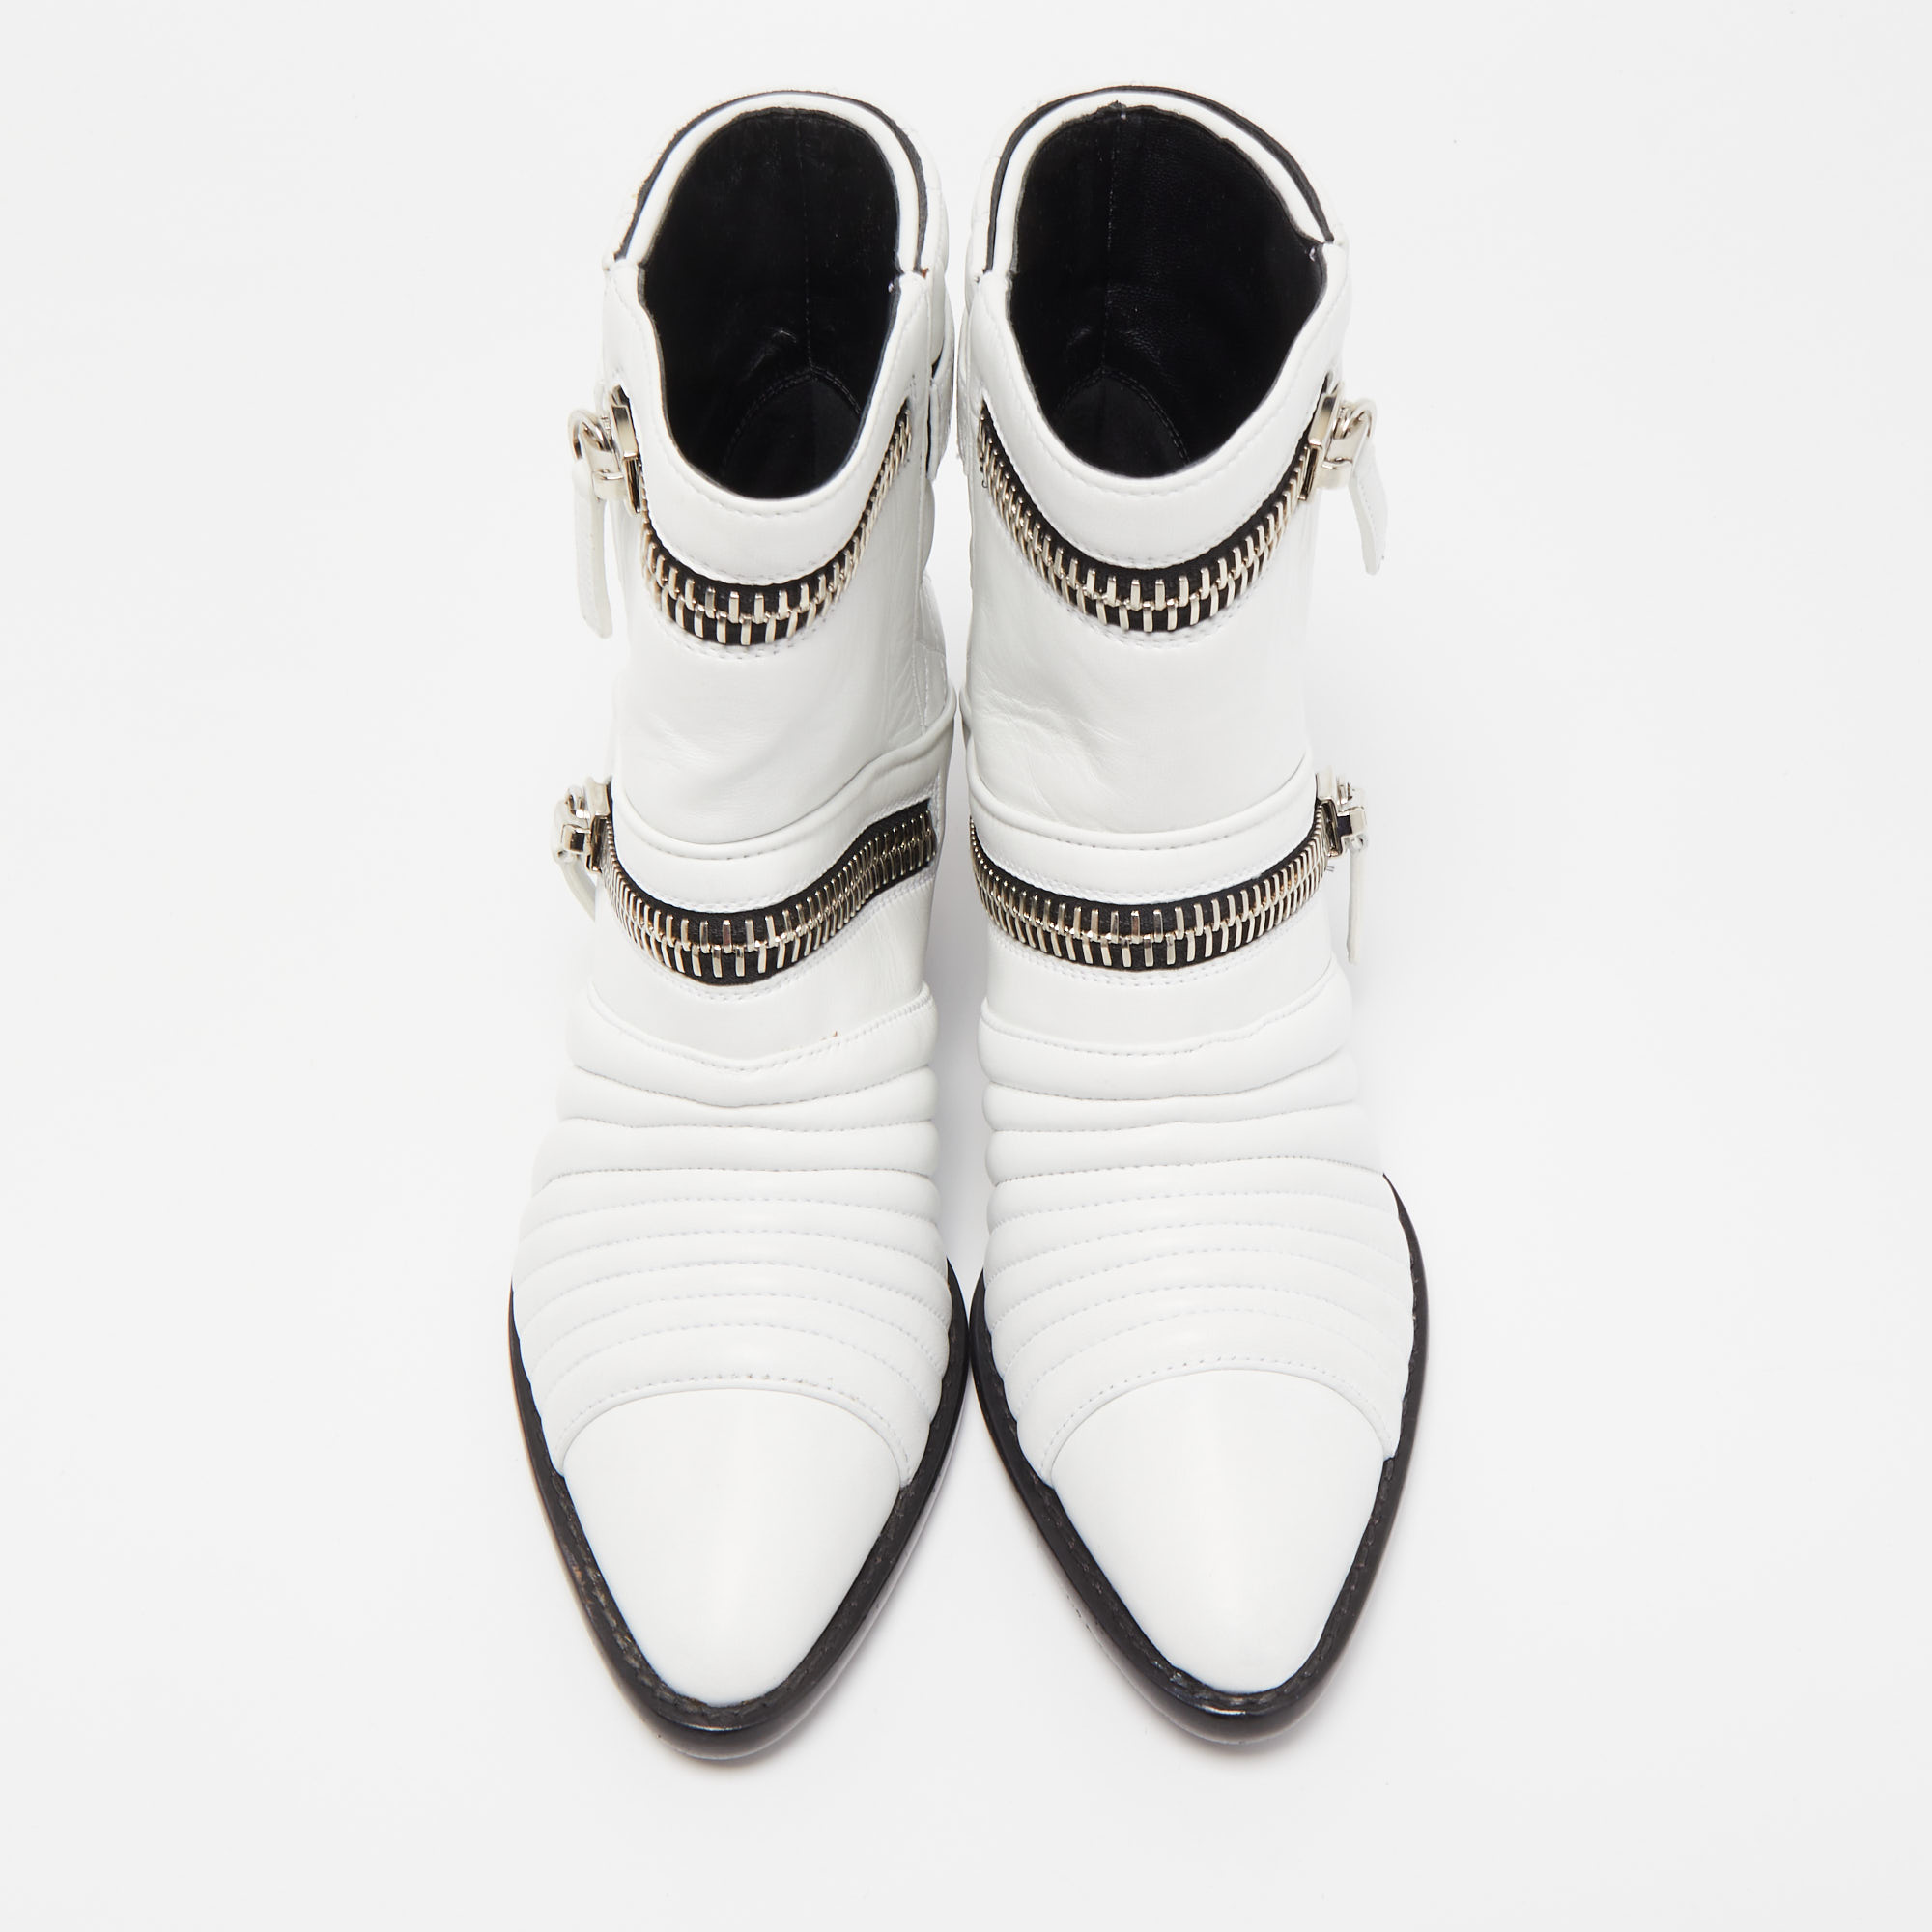 Giuseppe Zanotti White Quilted Leather Ankle Boots Size 38